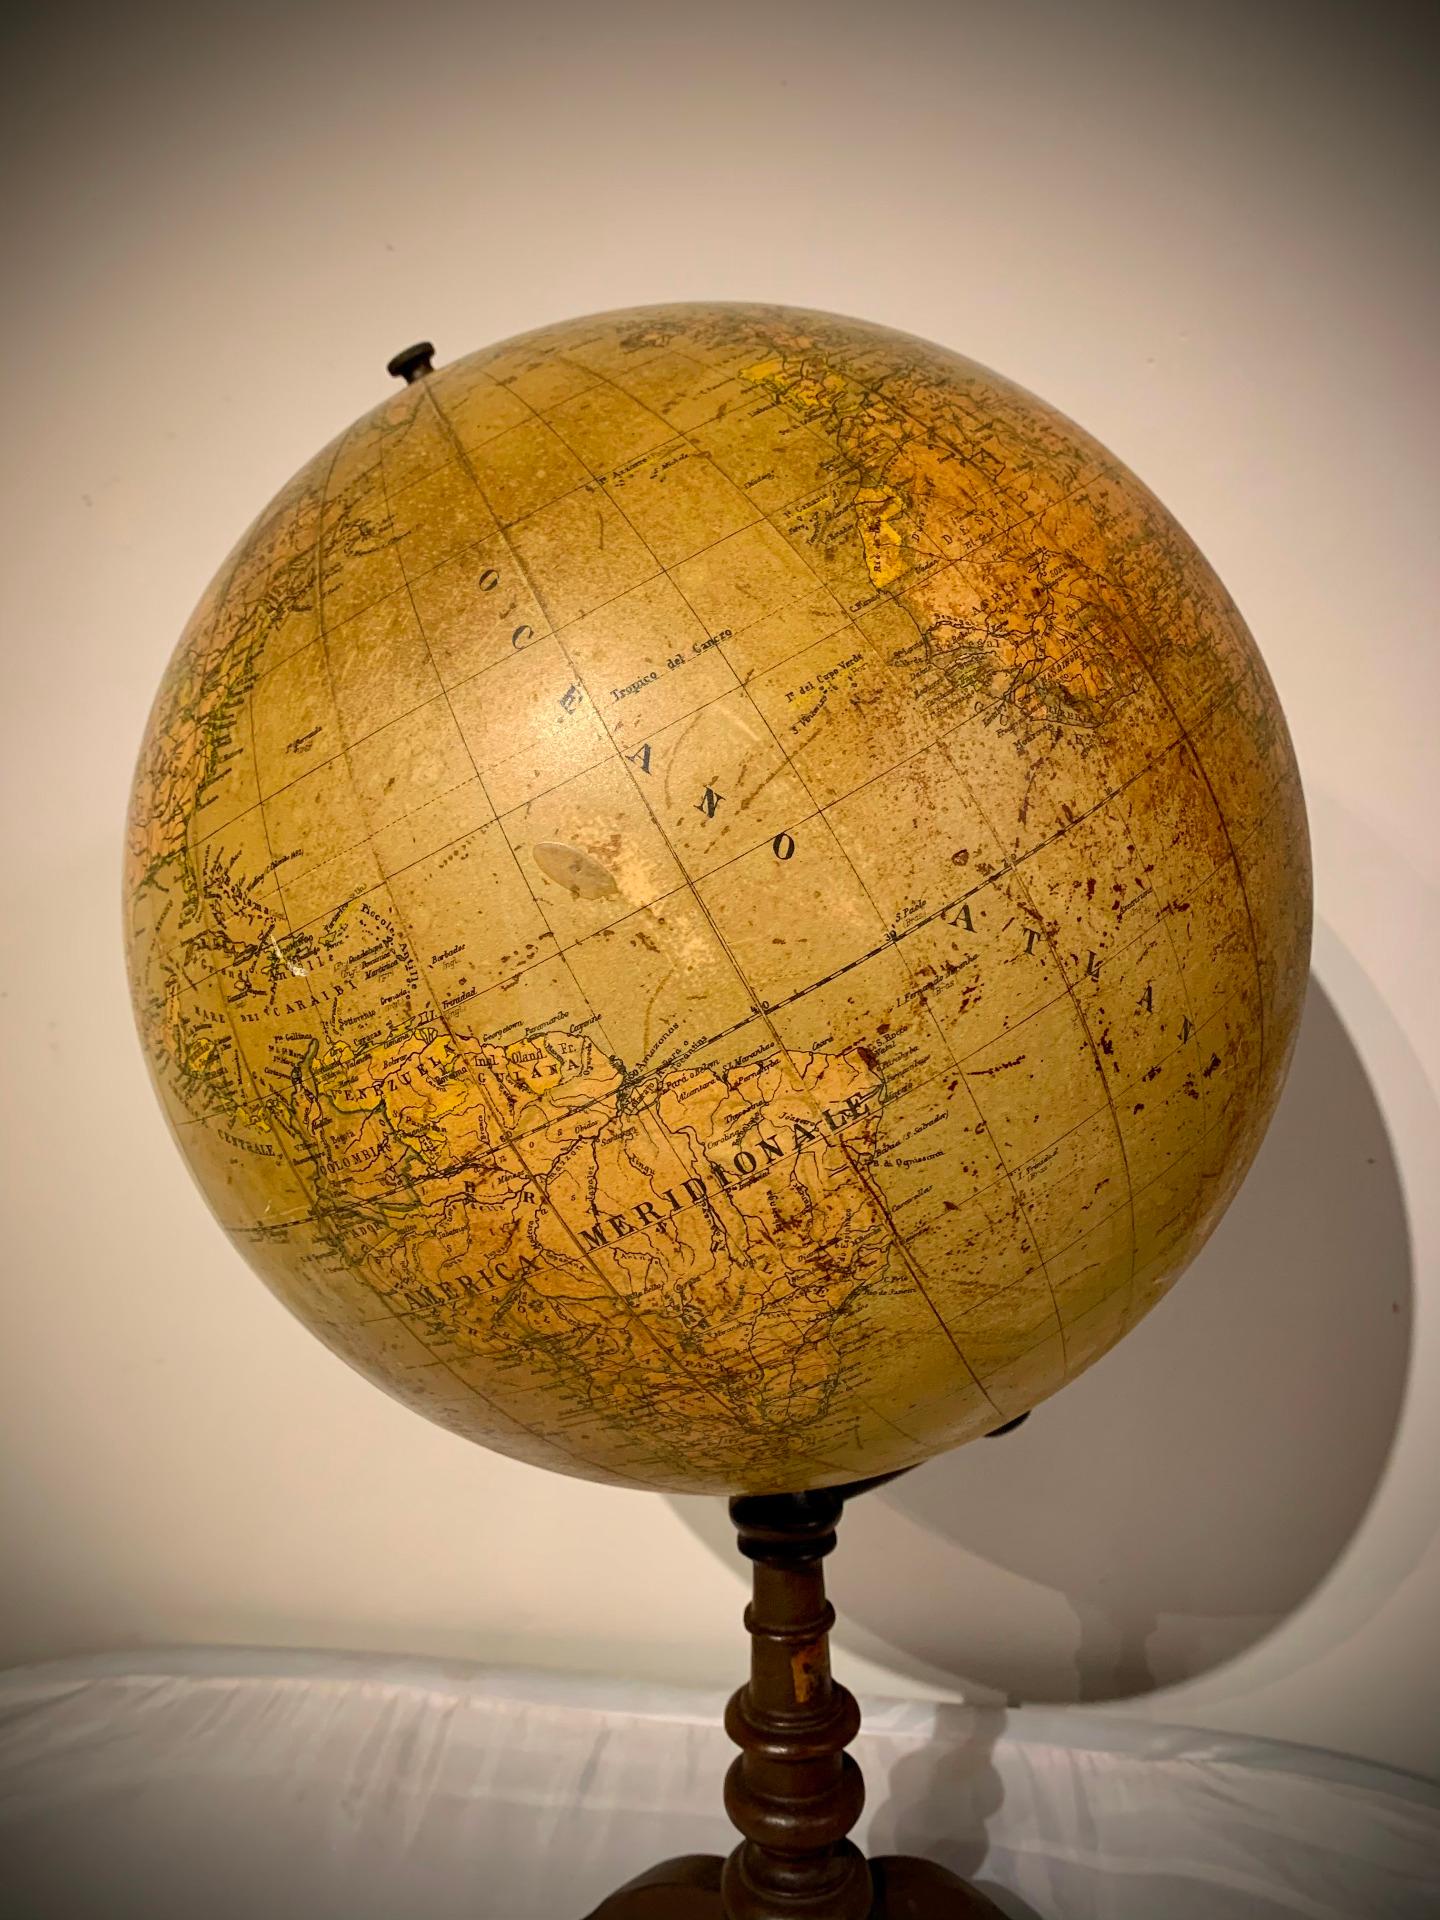 Beautiful physical and political terrestrial table globe on bronze base and plaster sphere with double rotary movement.
Designed by Prof. Guido Cora for G.B.Paravia Editori in the first half of the 1900s
MEASUREMENTS: Diameter 30 cm, height 56 cm